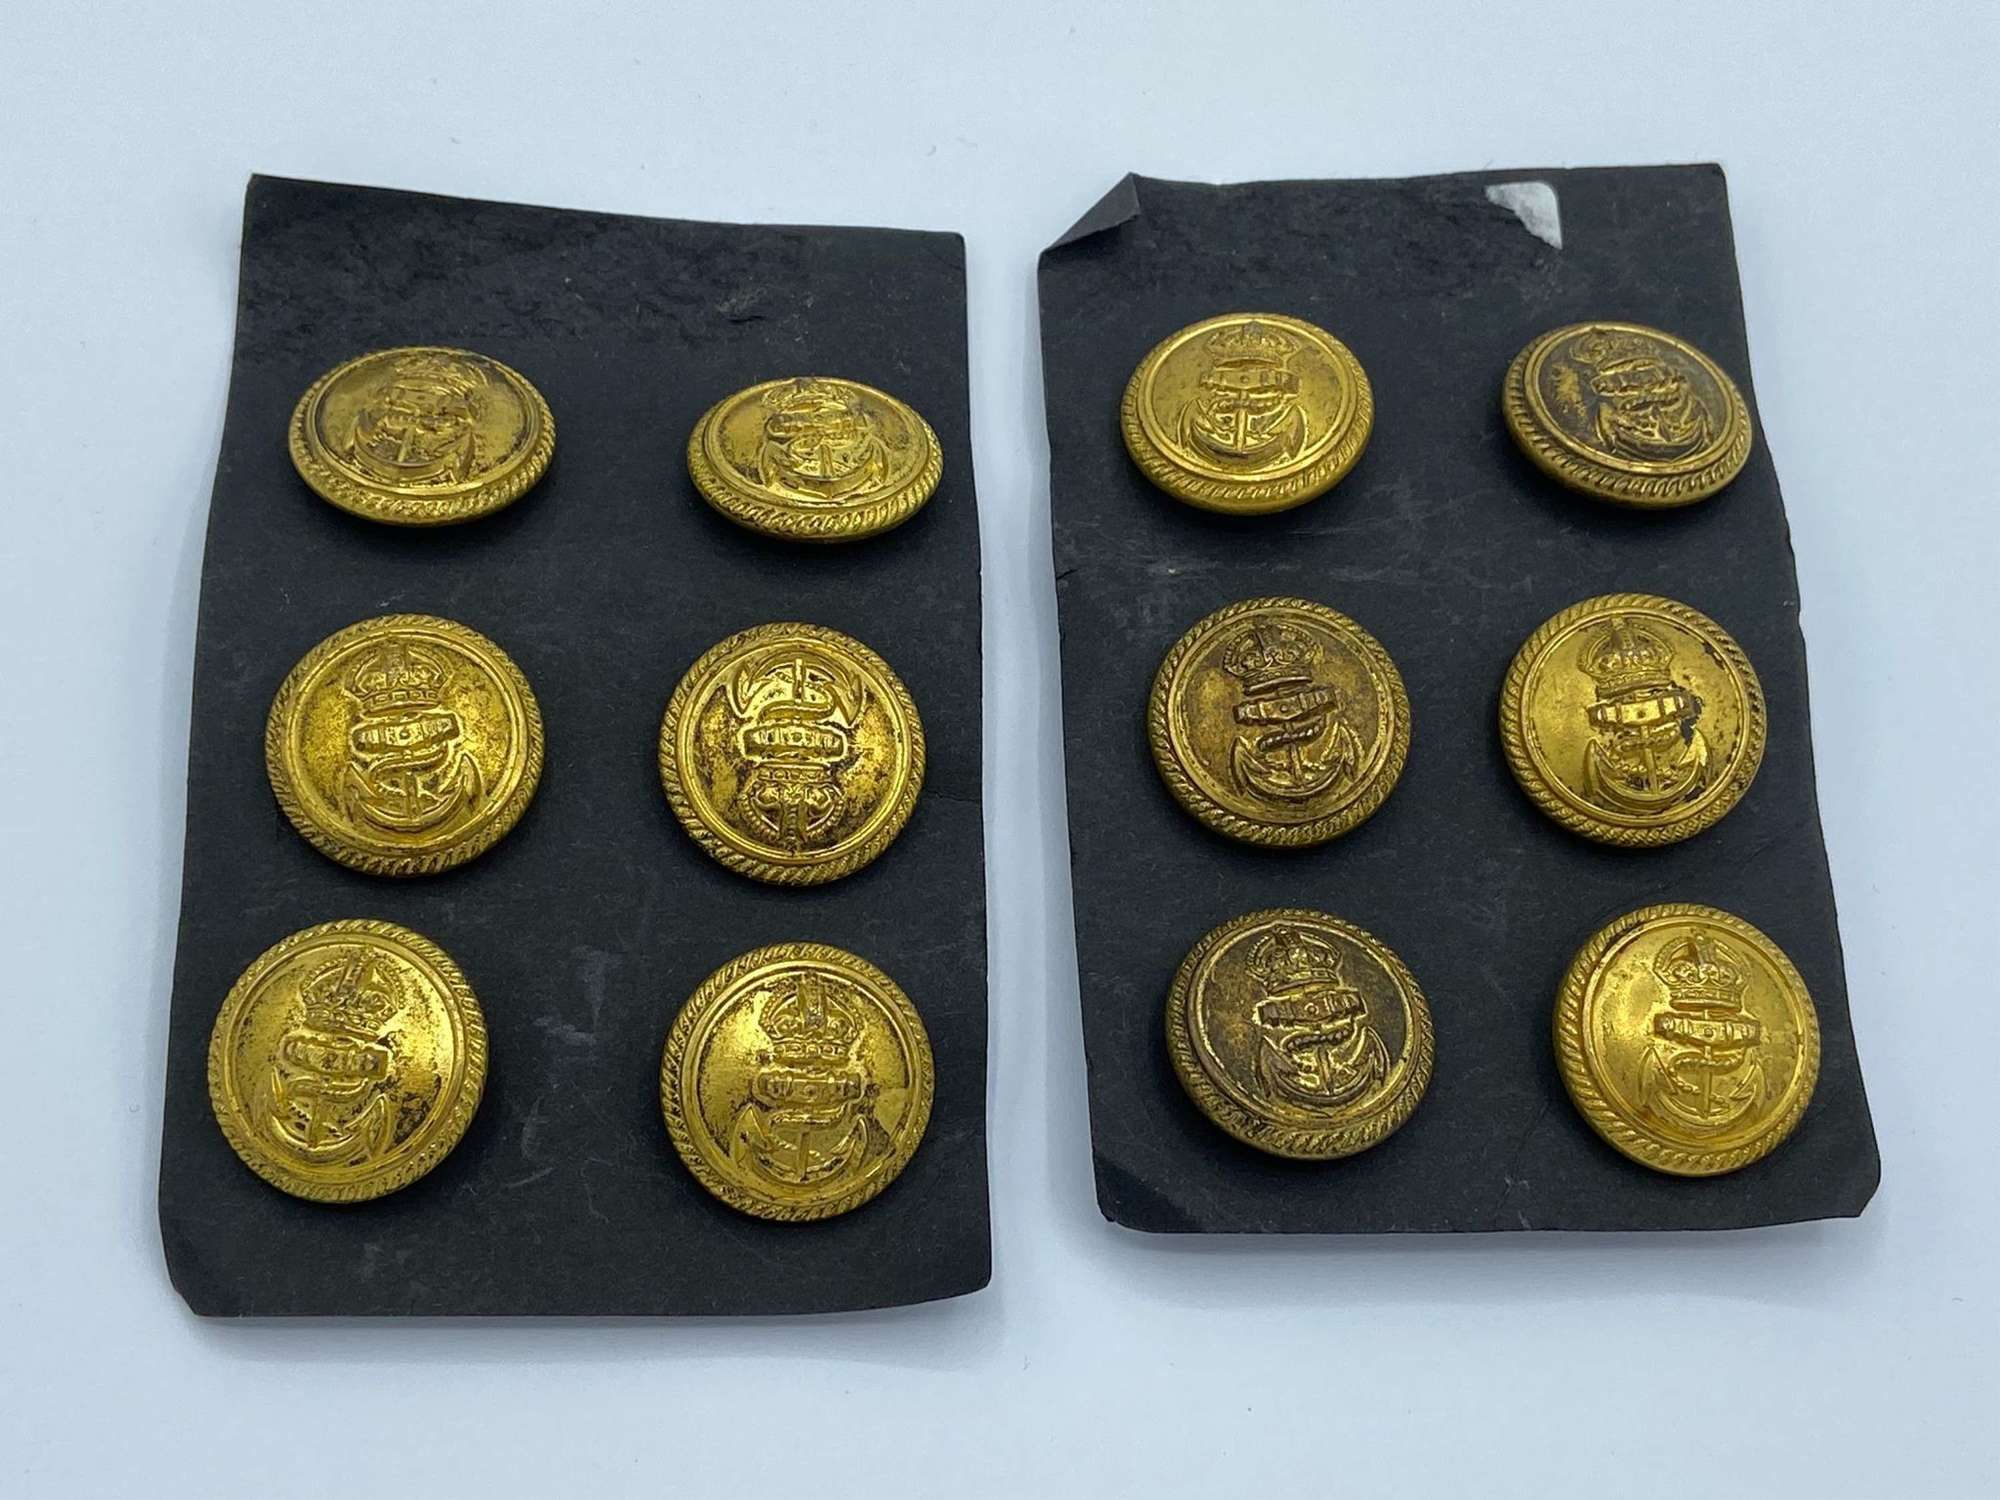 1901 Officers Royal Navy Buttons by Gieve Matthews & Seagrove Ltd